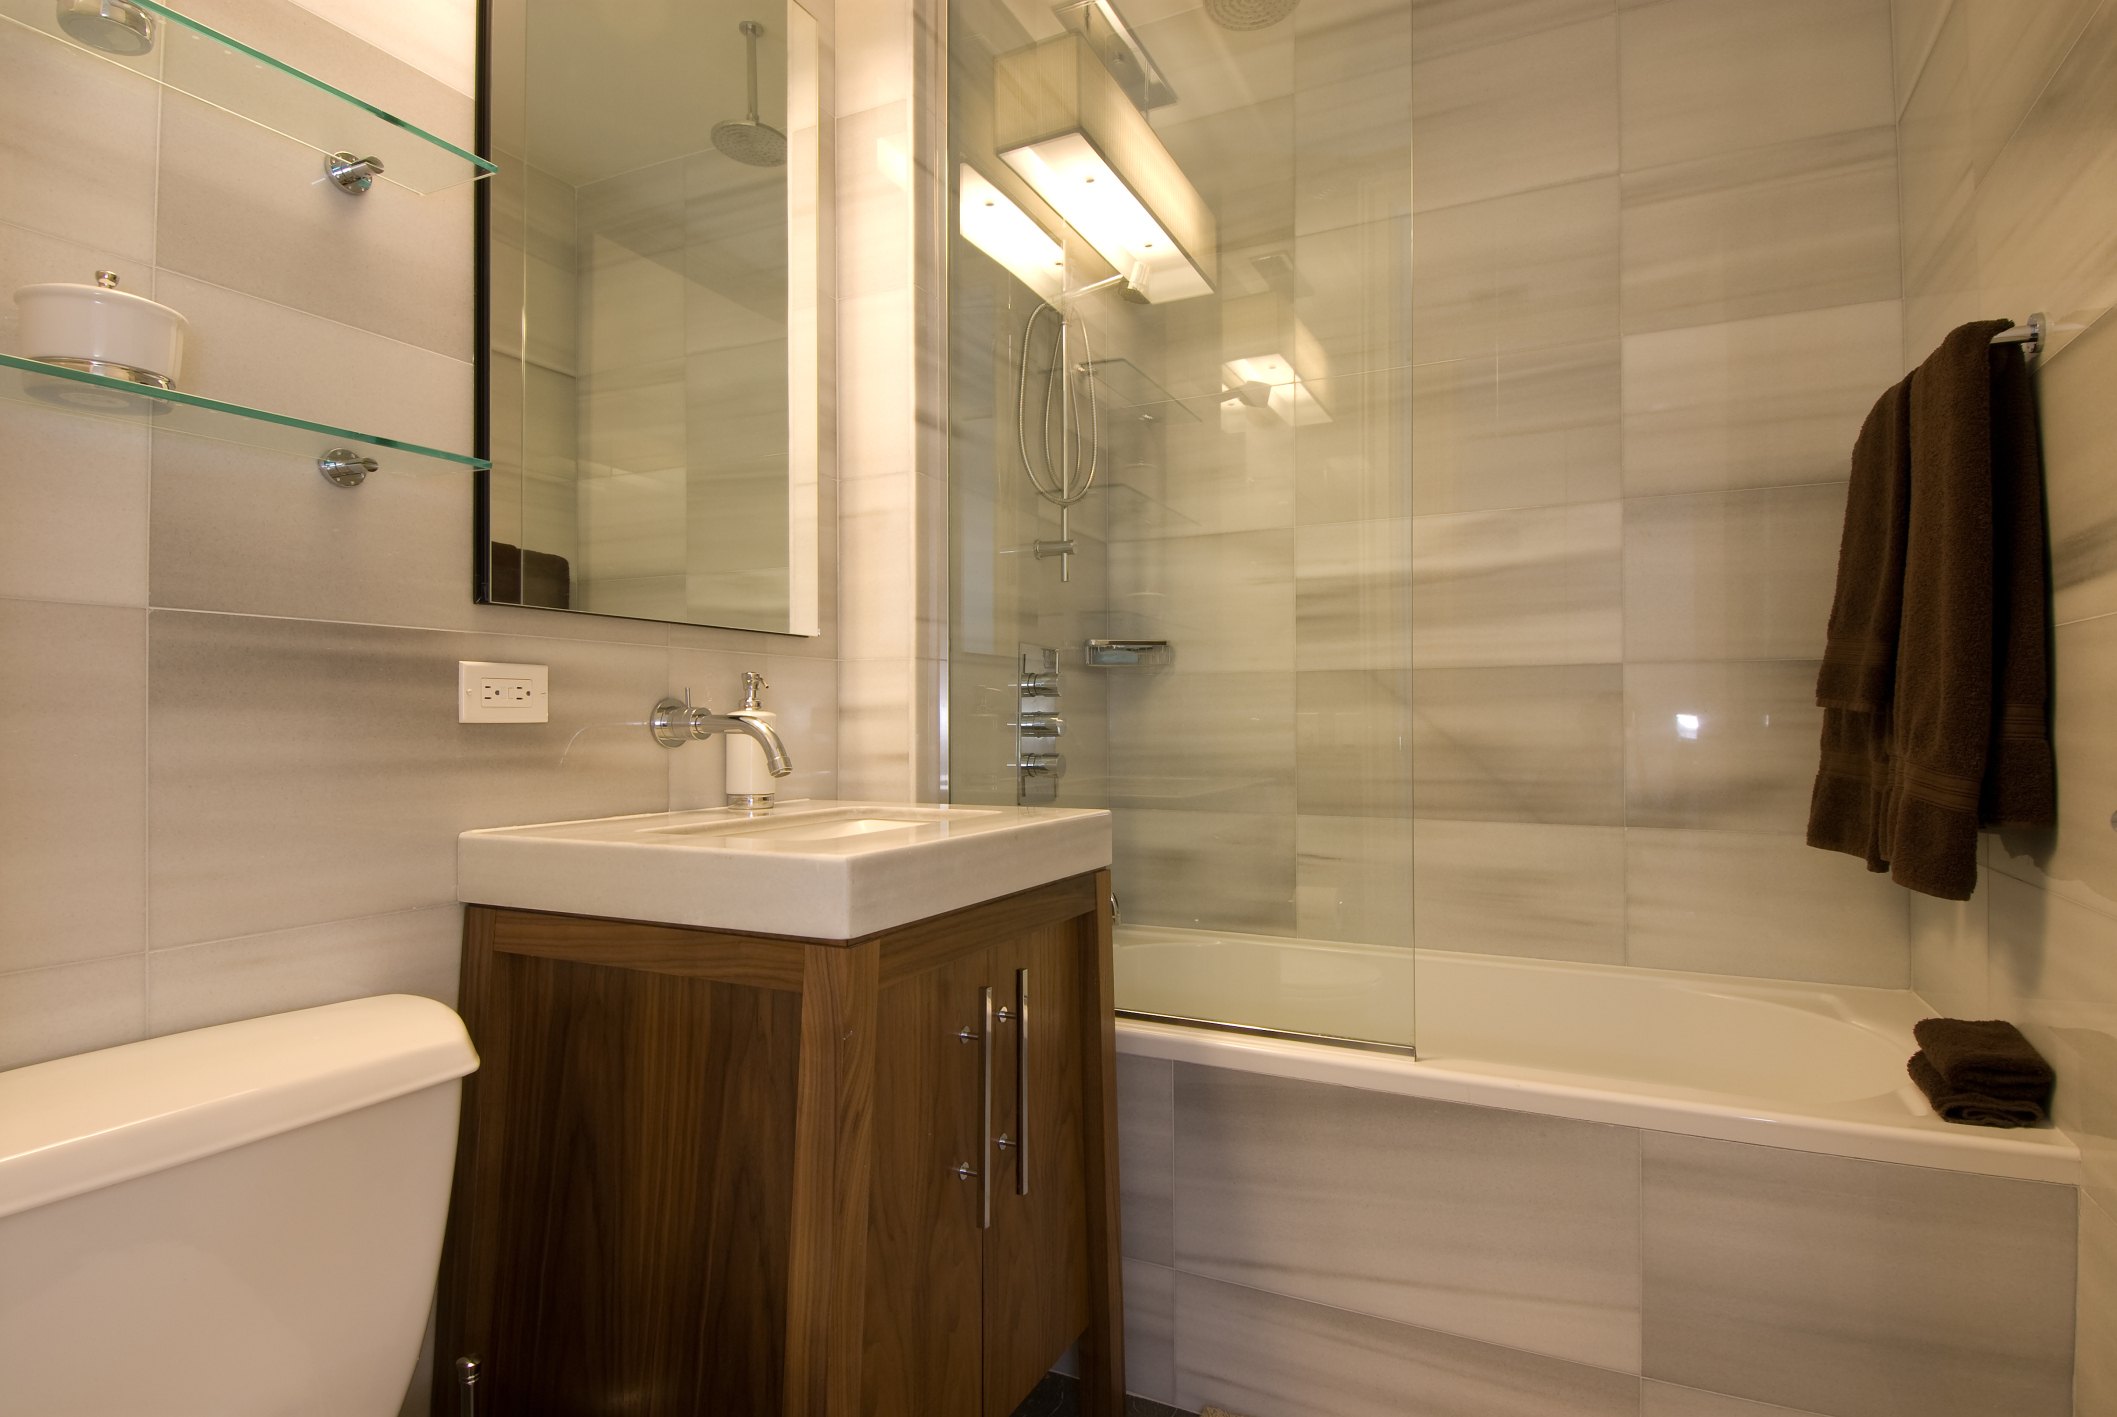  Shower  and Tub  Ideas  for a Small Bathroom  with Pictures 